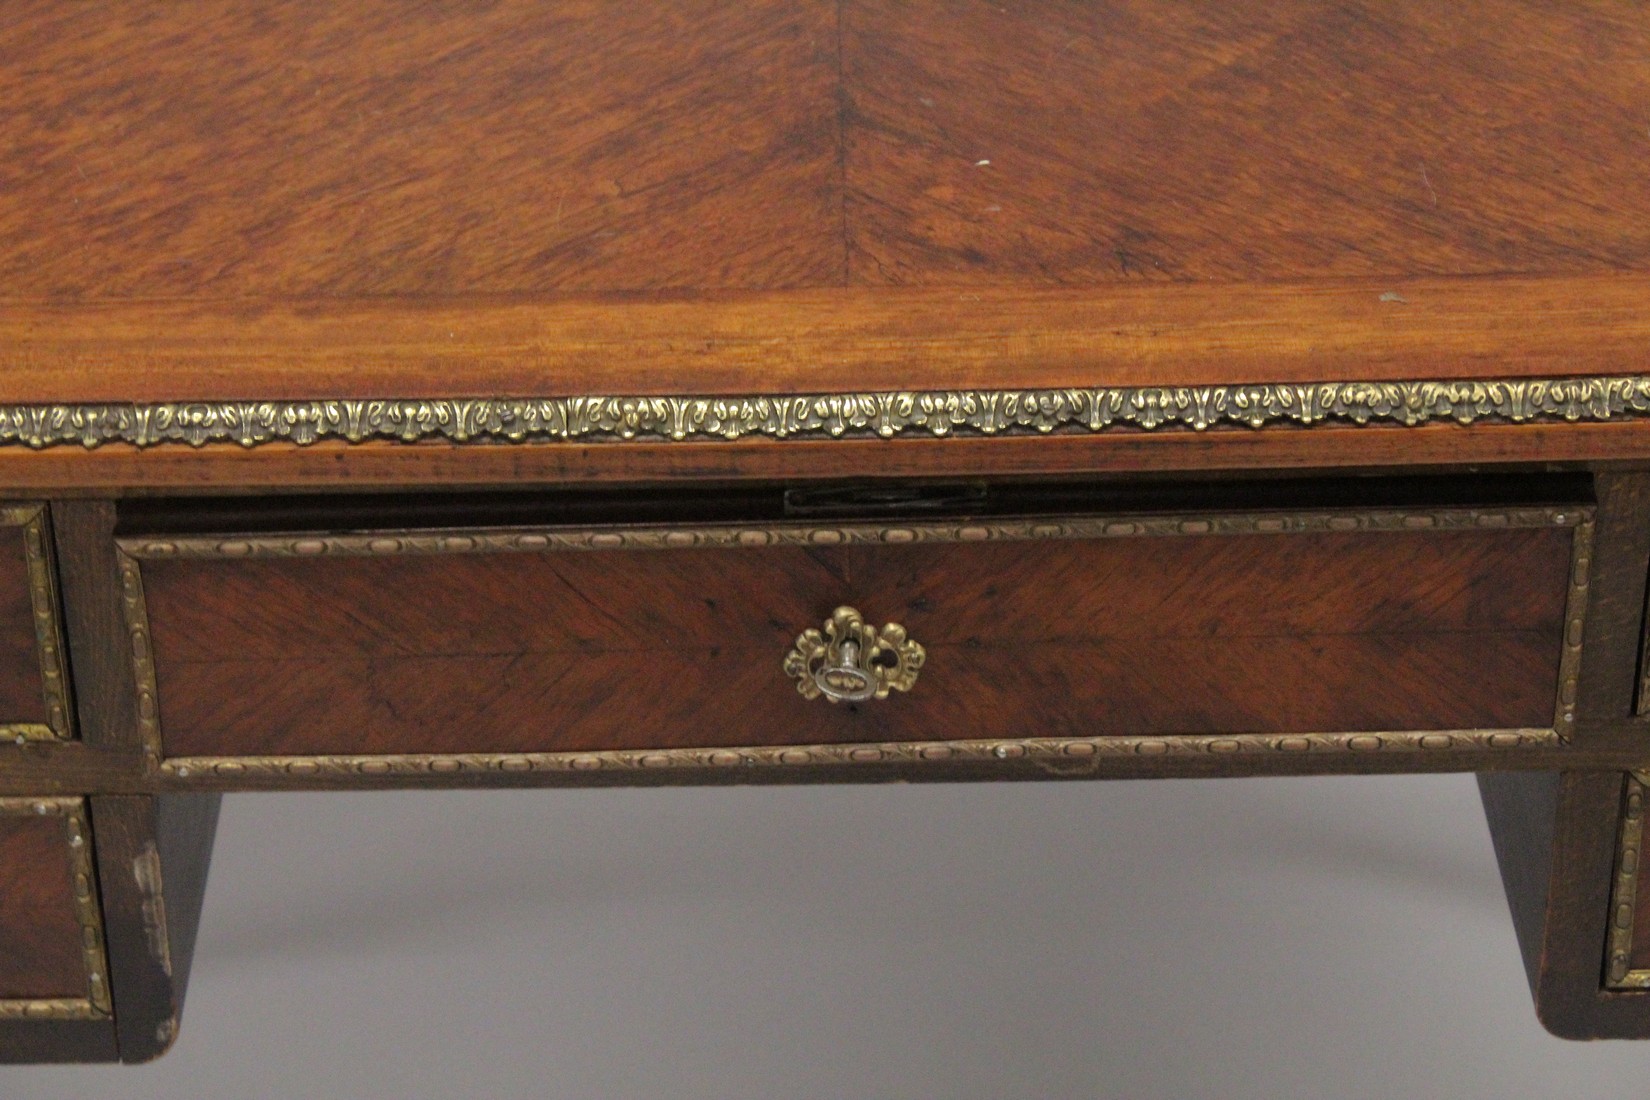 A LOUIS XVITH DESIGN WRITING TABLE with wooden top, five drawers on turned legs with ormolu - Image 3 of 7